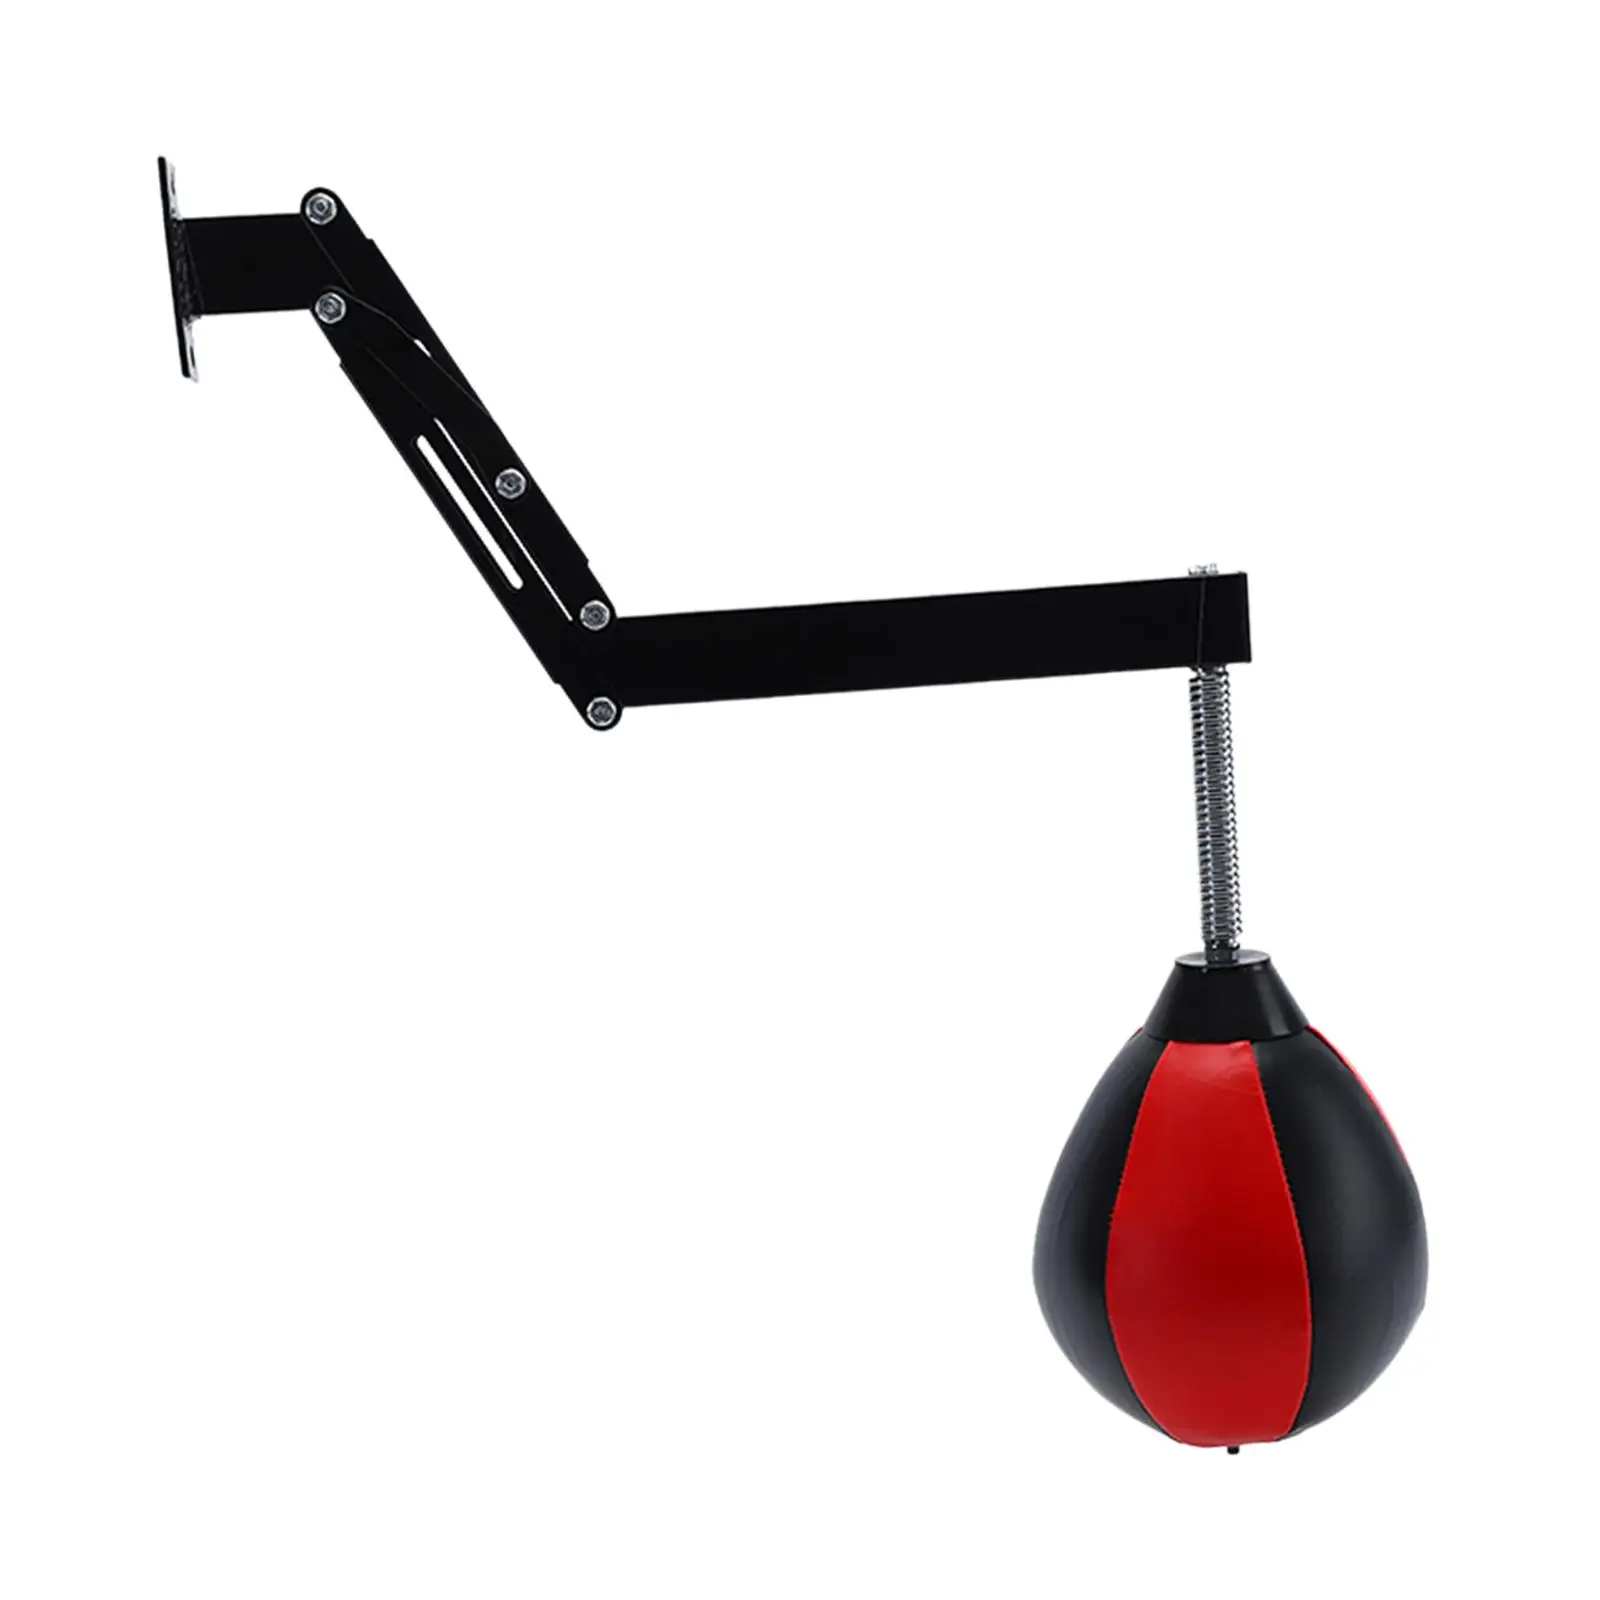 Speed Bag Wall Mount Inflatable Boxing Punching Bag for Sparring Sanda Fighting